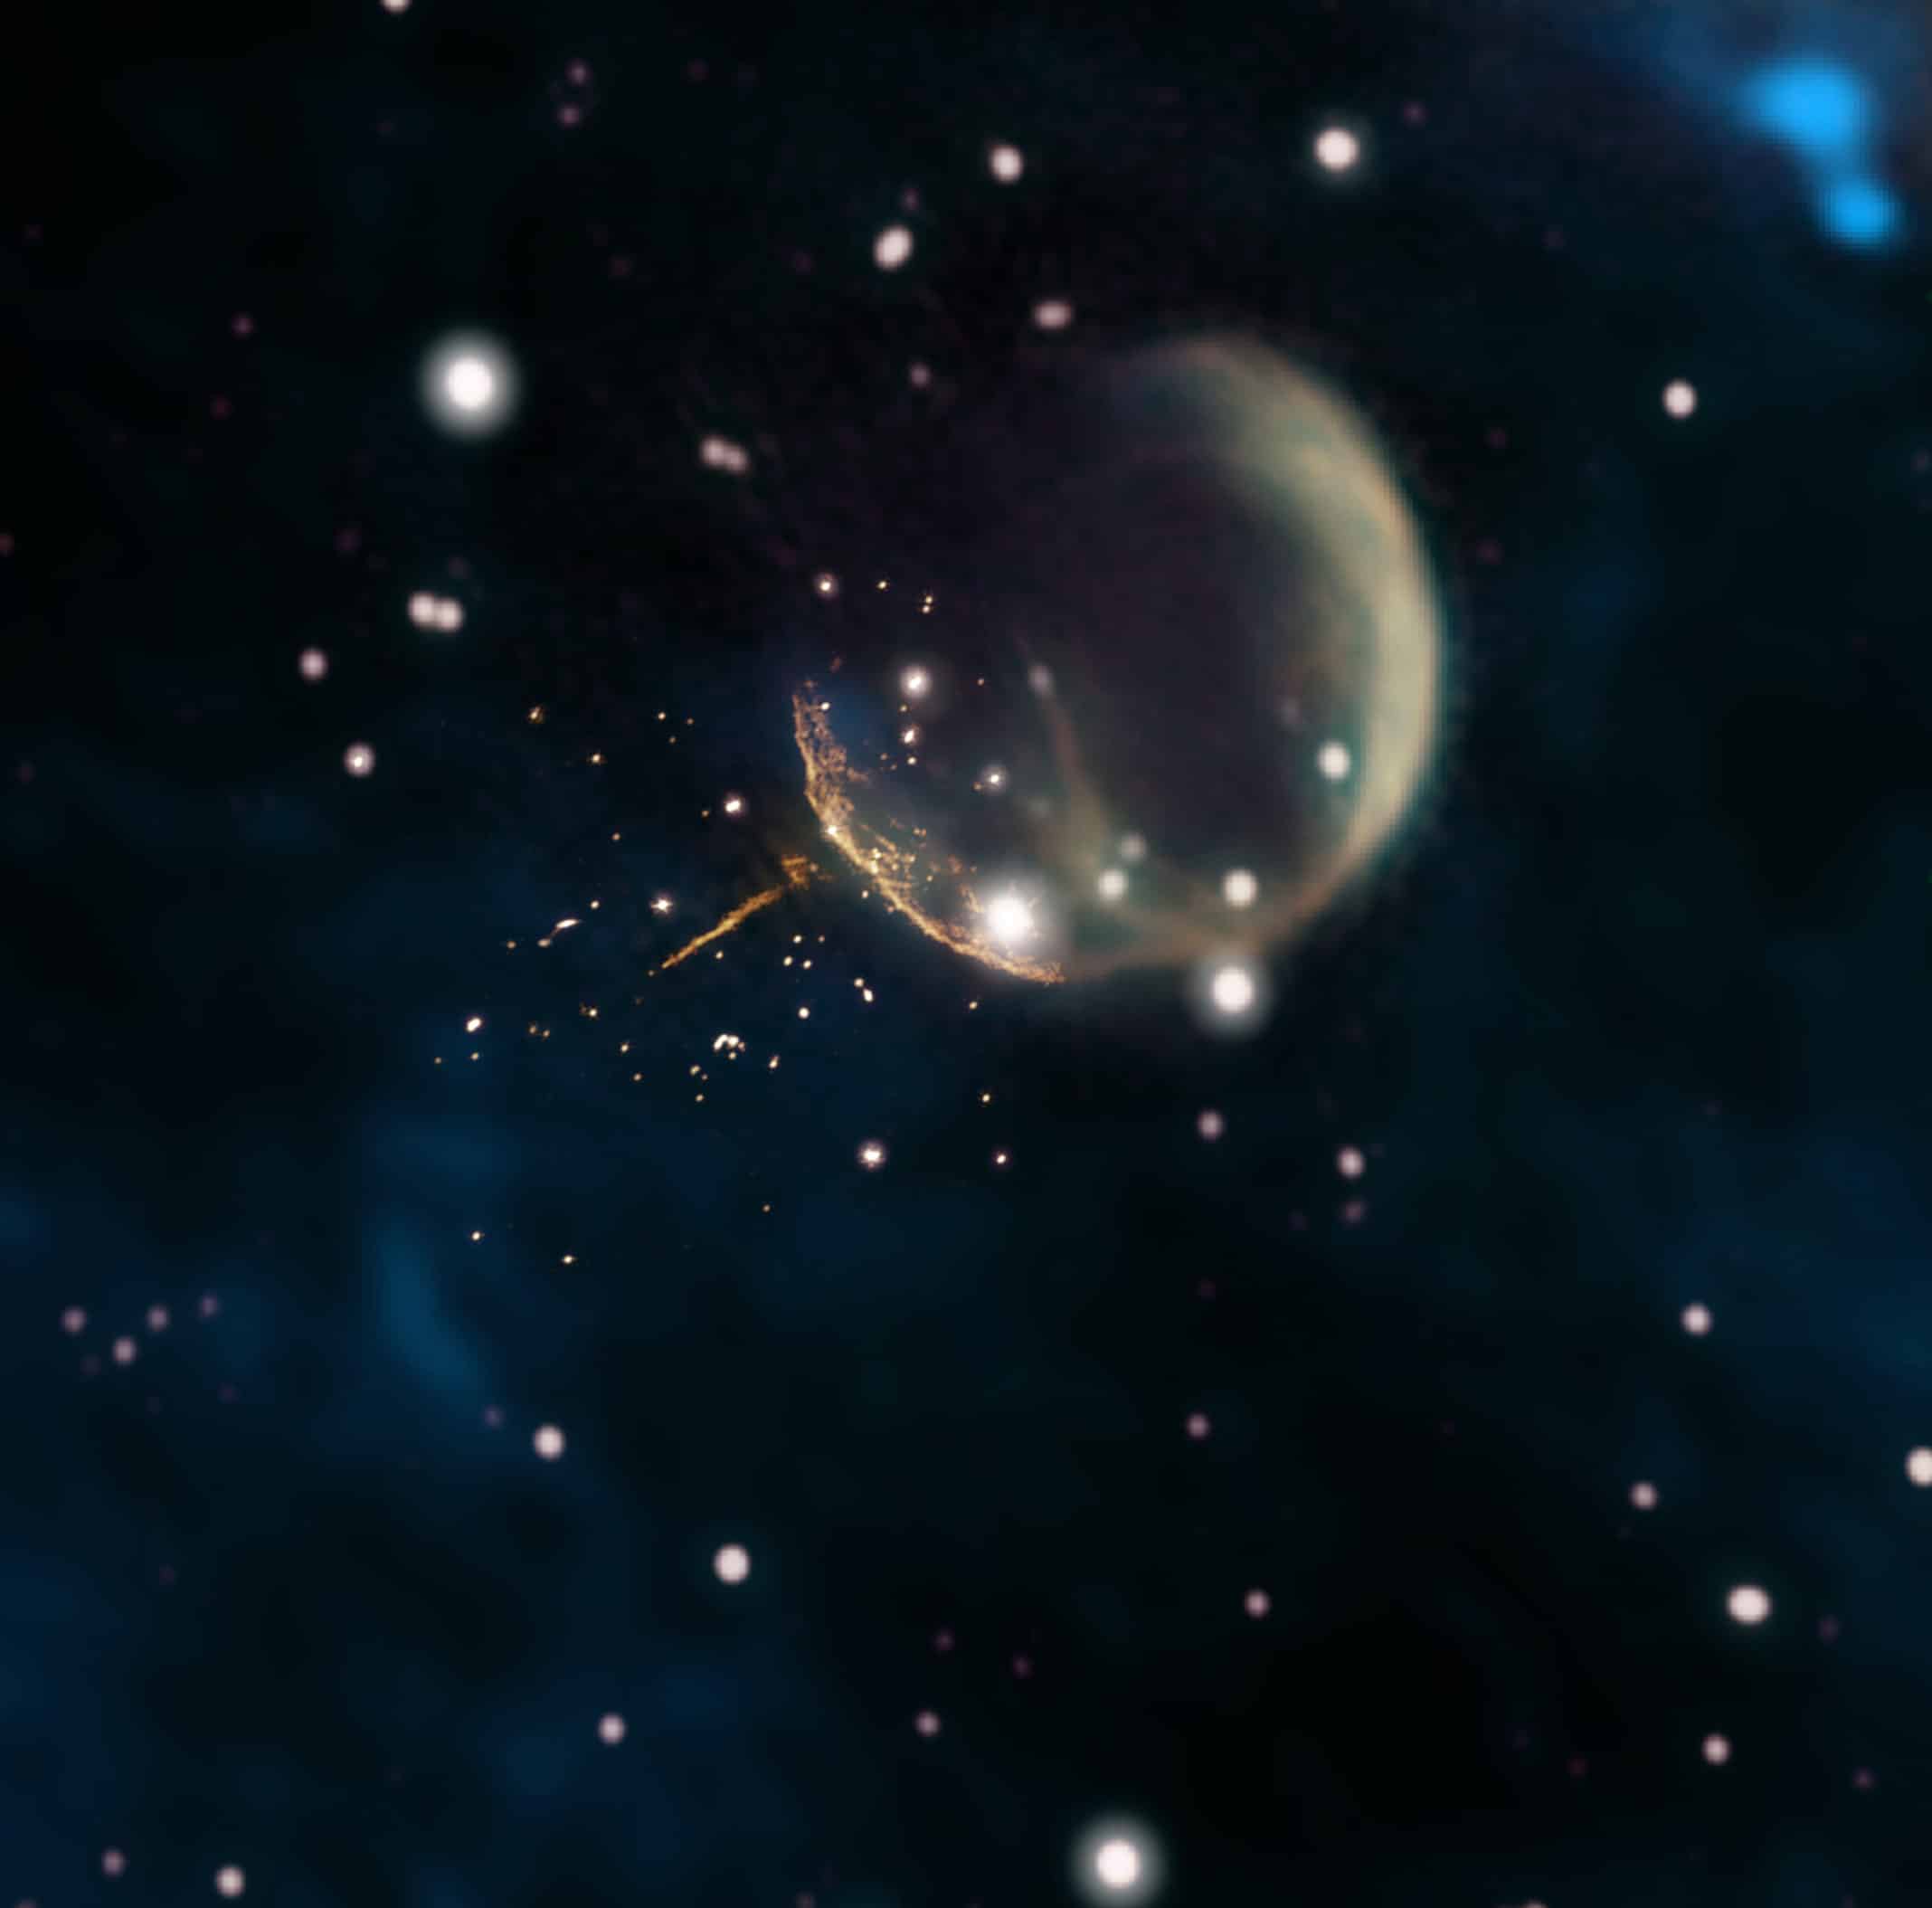 The CTB 1 supernova remnant resembles a ghostly bubble in this image, which combines new 1.5 gigahertz observations from the Very Large Array (VLA) radio telescope (orange, near center) with older observations from the Dominion Radio Astrophysical Observatory’s Canadian Galactic Plane Survey (1.42 gigahertz, magenta and yellow; 408 megahertz, green) and infrared data (blue). The VLA data clearly reveal the straight, glowing trail from pulsar J0002+6216 and the curved rim of the remnant’s shell. CTB 1 is about half a degree across, the apparent size of a full Moon. Credits: Composite by Jayanne English, University of Manitoba, using data from NRAO/F. Schinzel et al., DRAO/Canadian Galactic Plane Survey and NASA/IRAS